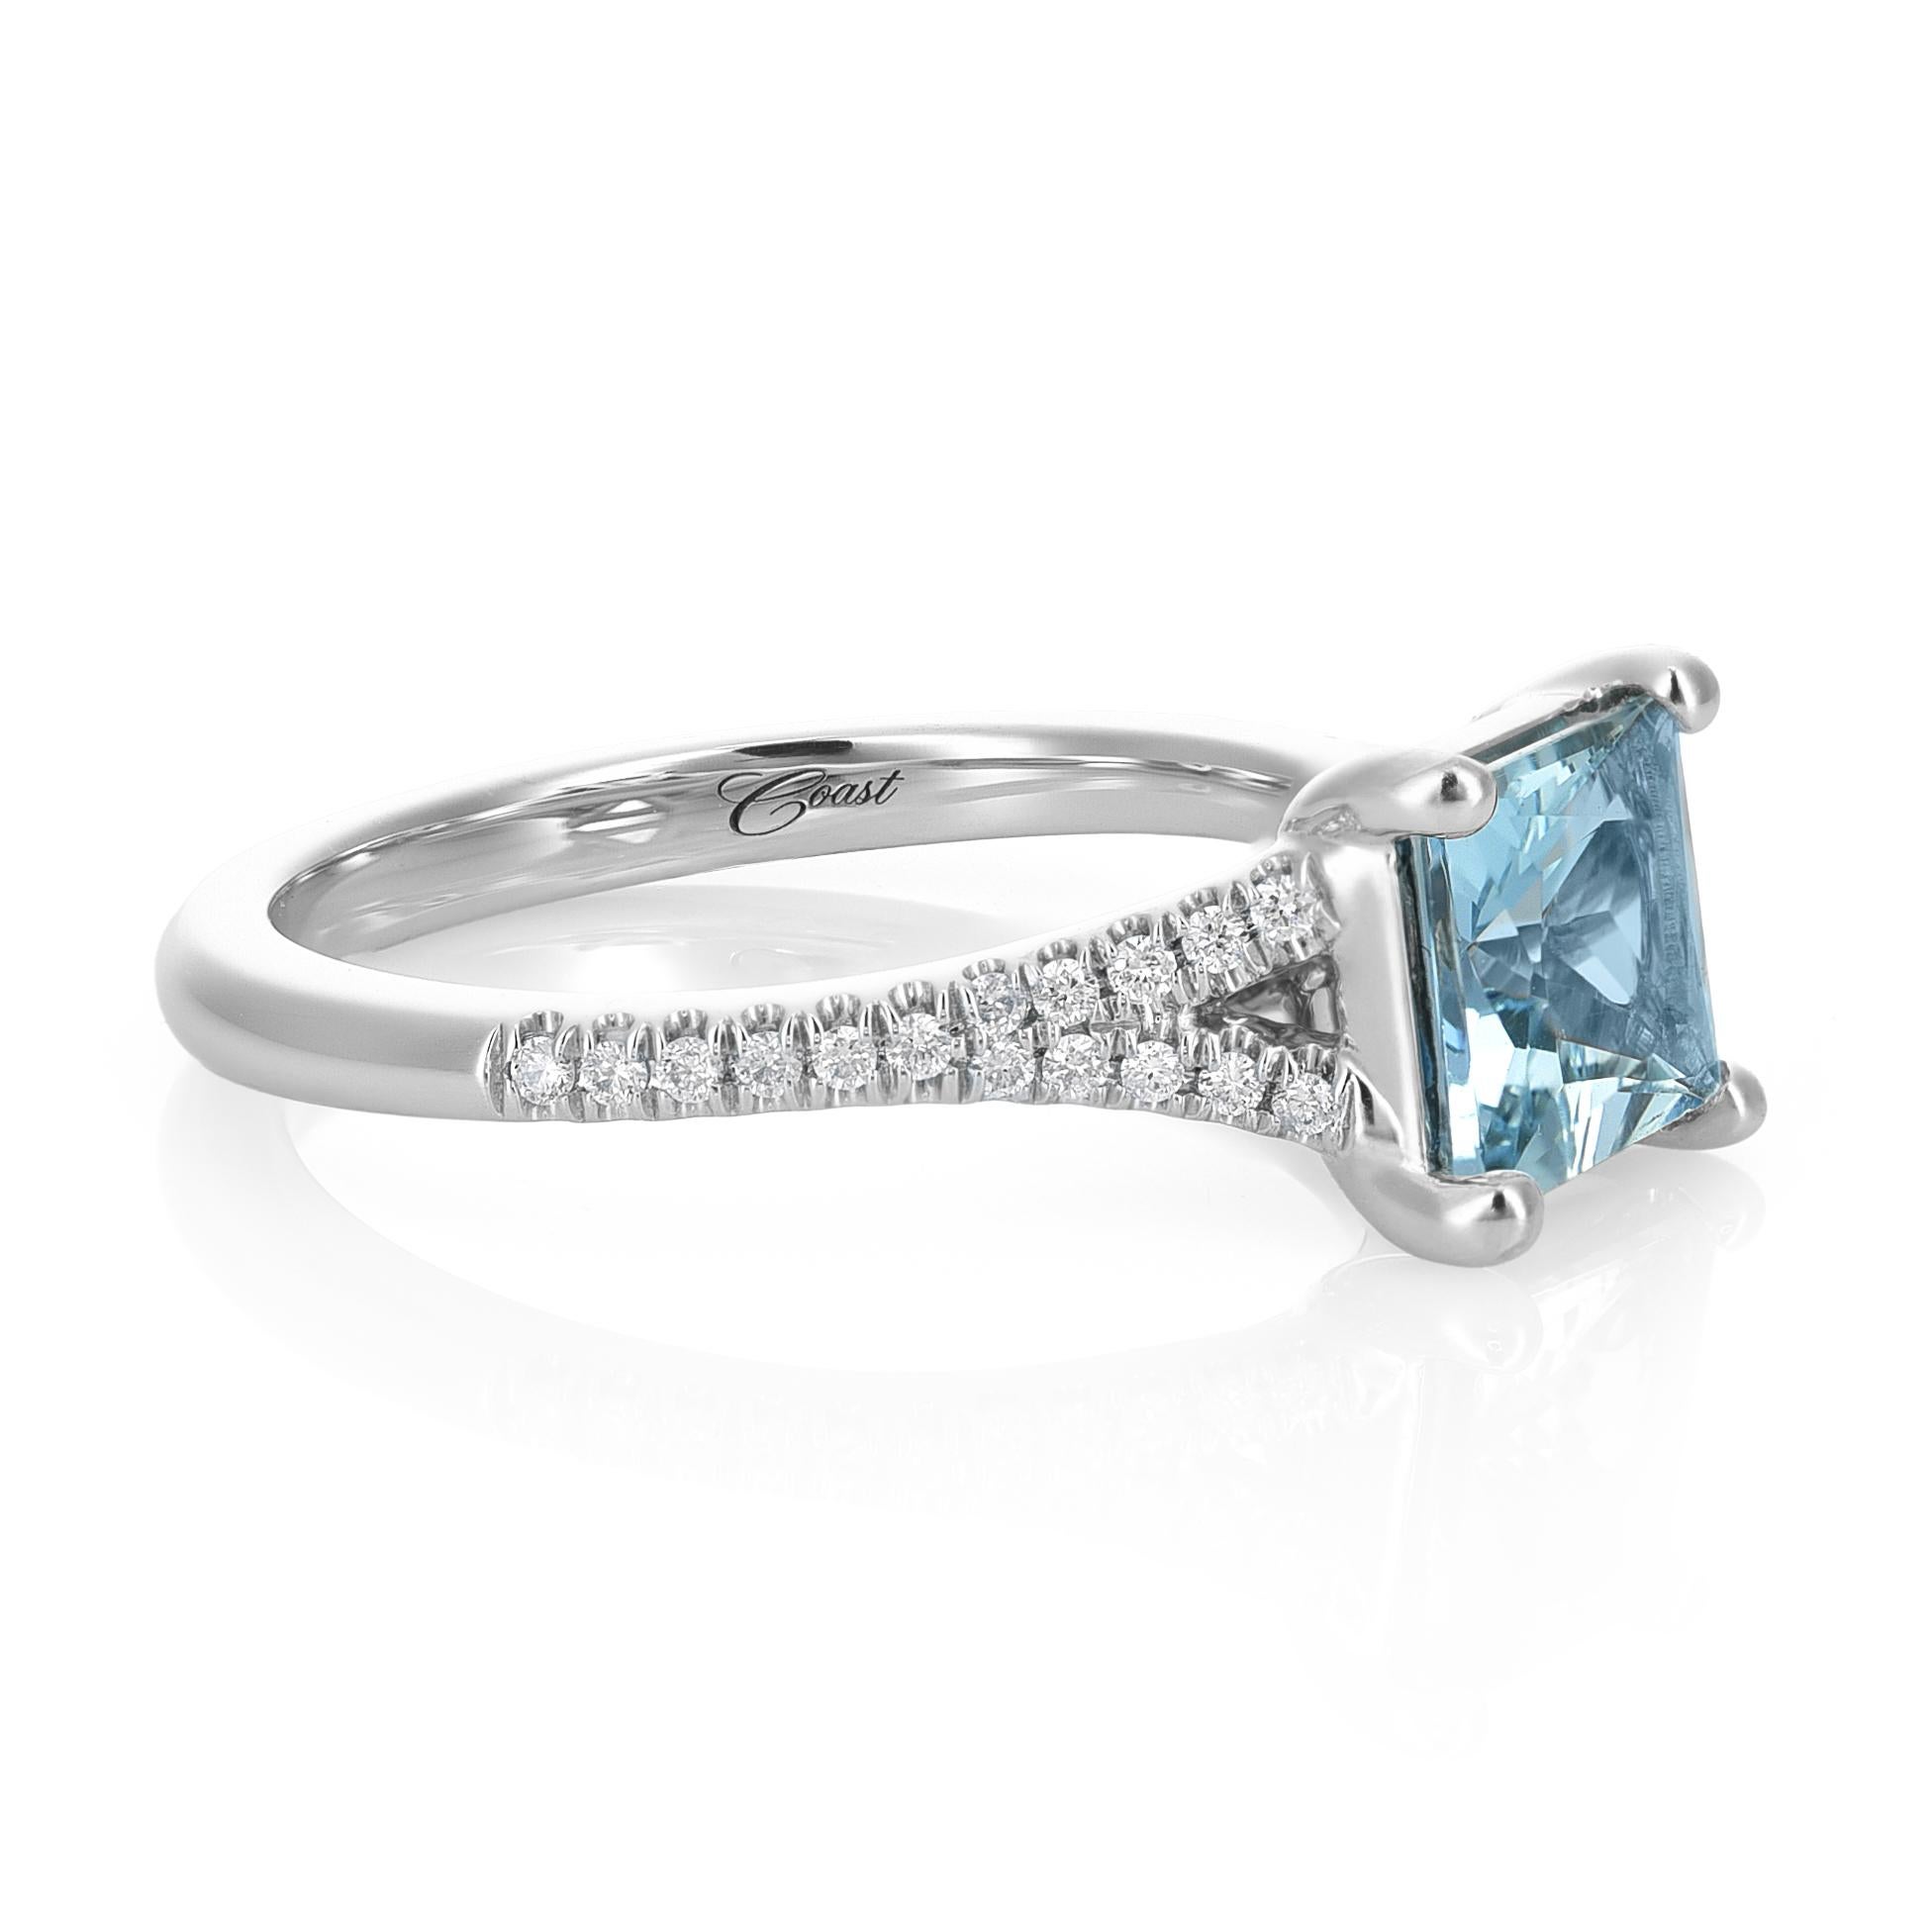 Presenting an exquisite jewel – a 14KW Gold Ring adorned with a captivating Natural Aquamarine weighing 1.47 carats. The Princess cut enhances the inherent beauty of the Aquamarine, creating a statement piece. This gem, skillfully heated, exudes a